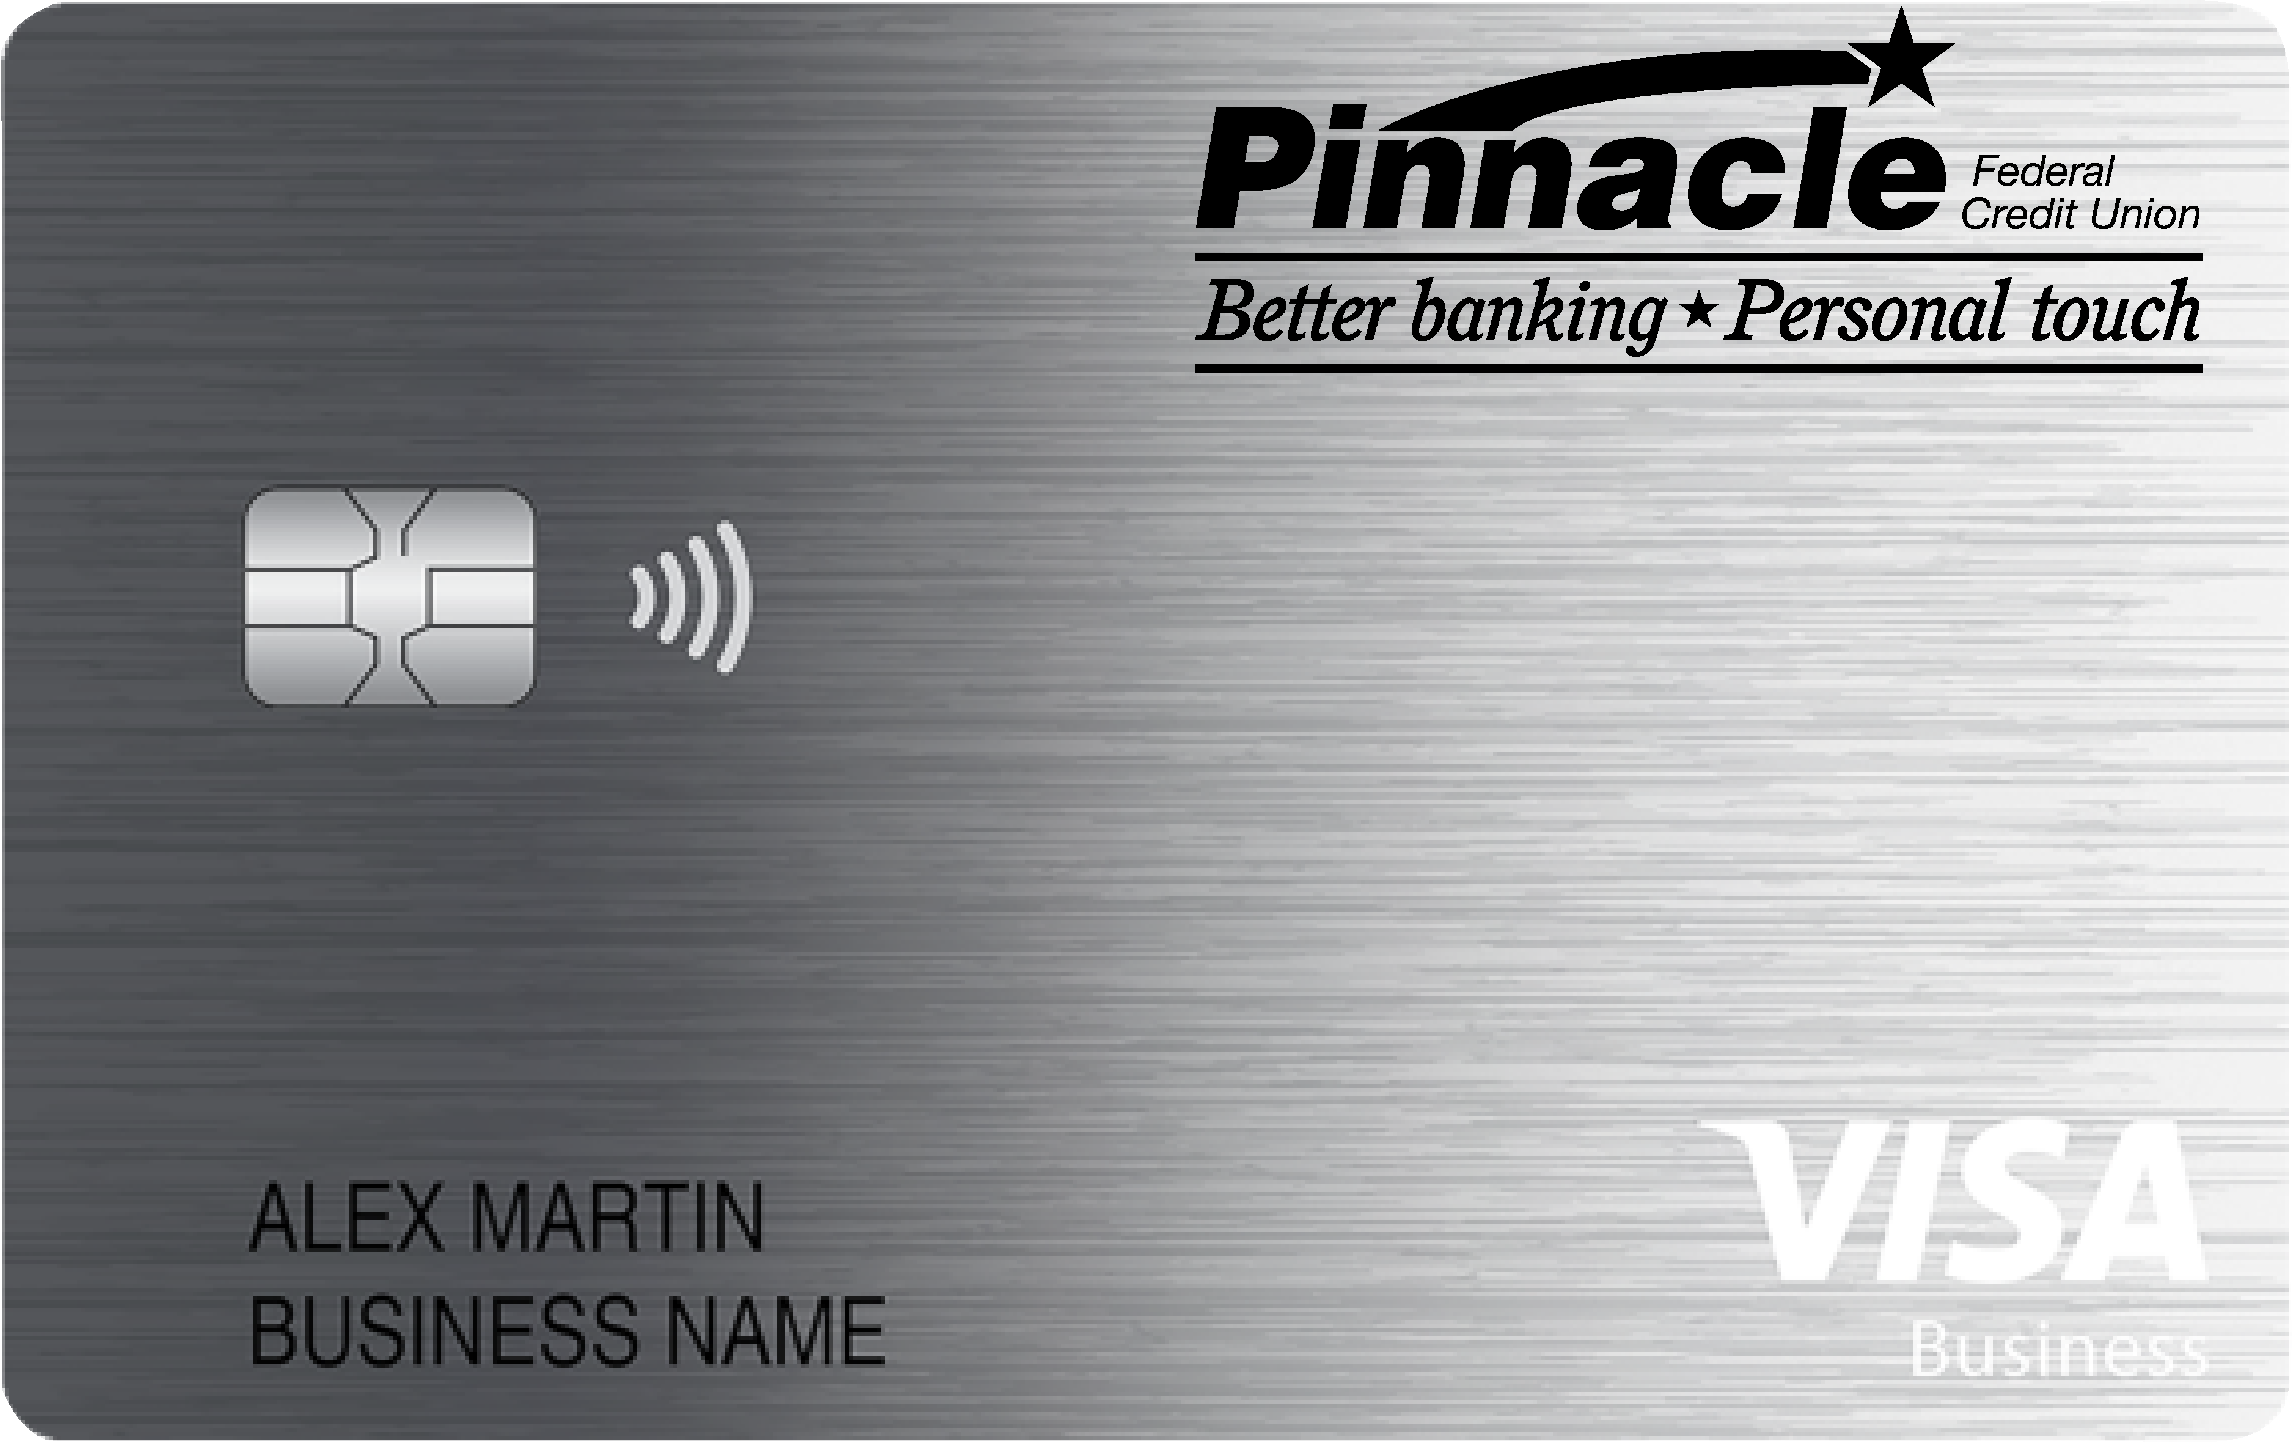 Pinnacle Federal Credit Union Business Real Rewards Card